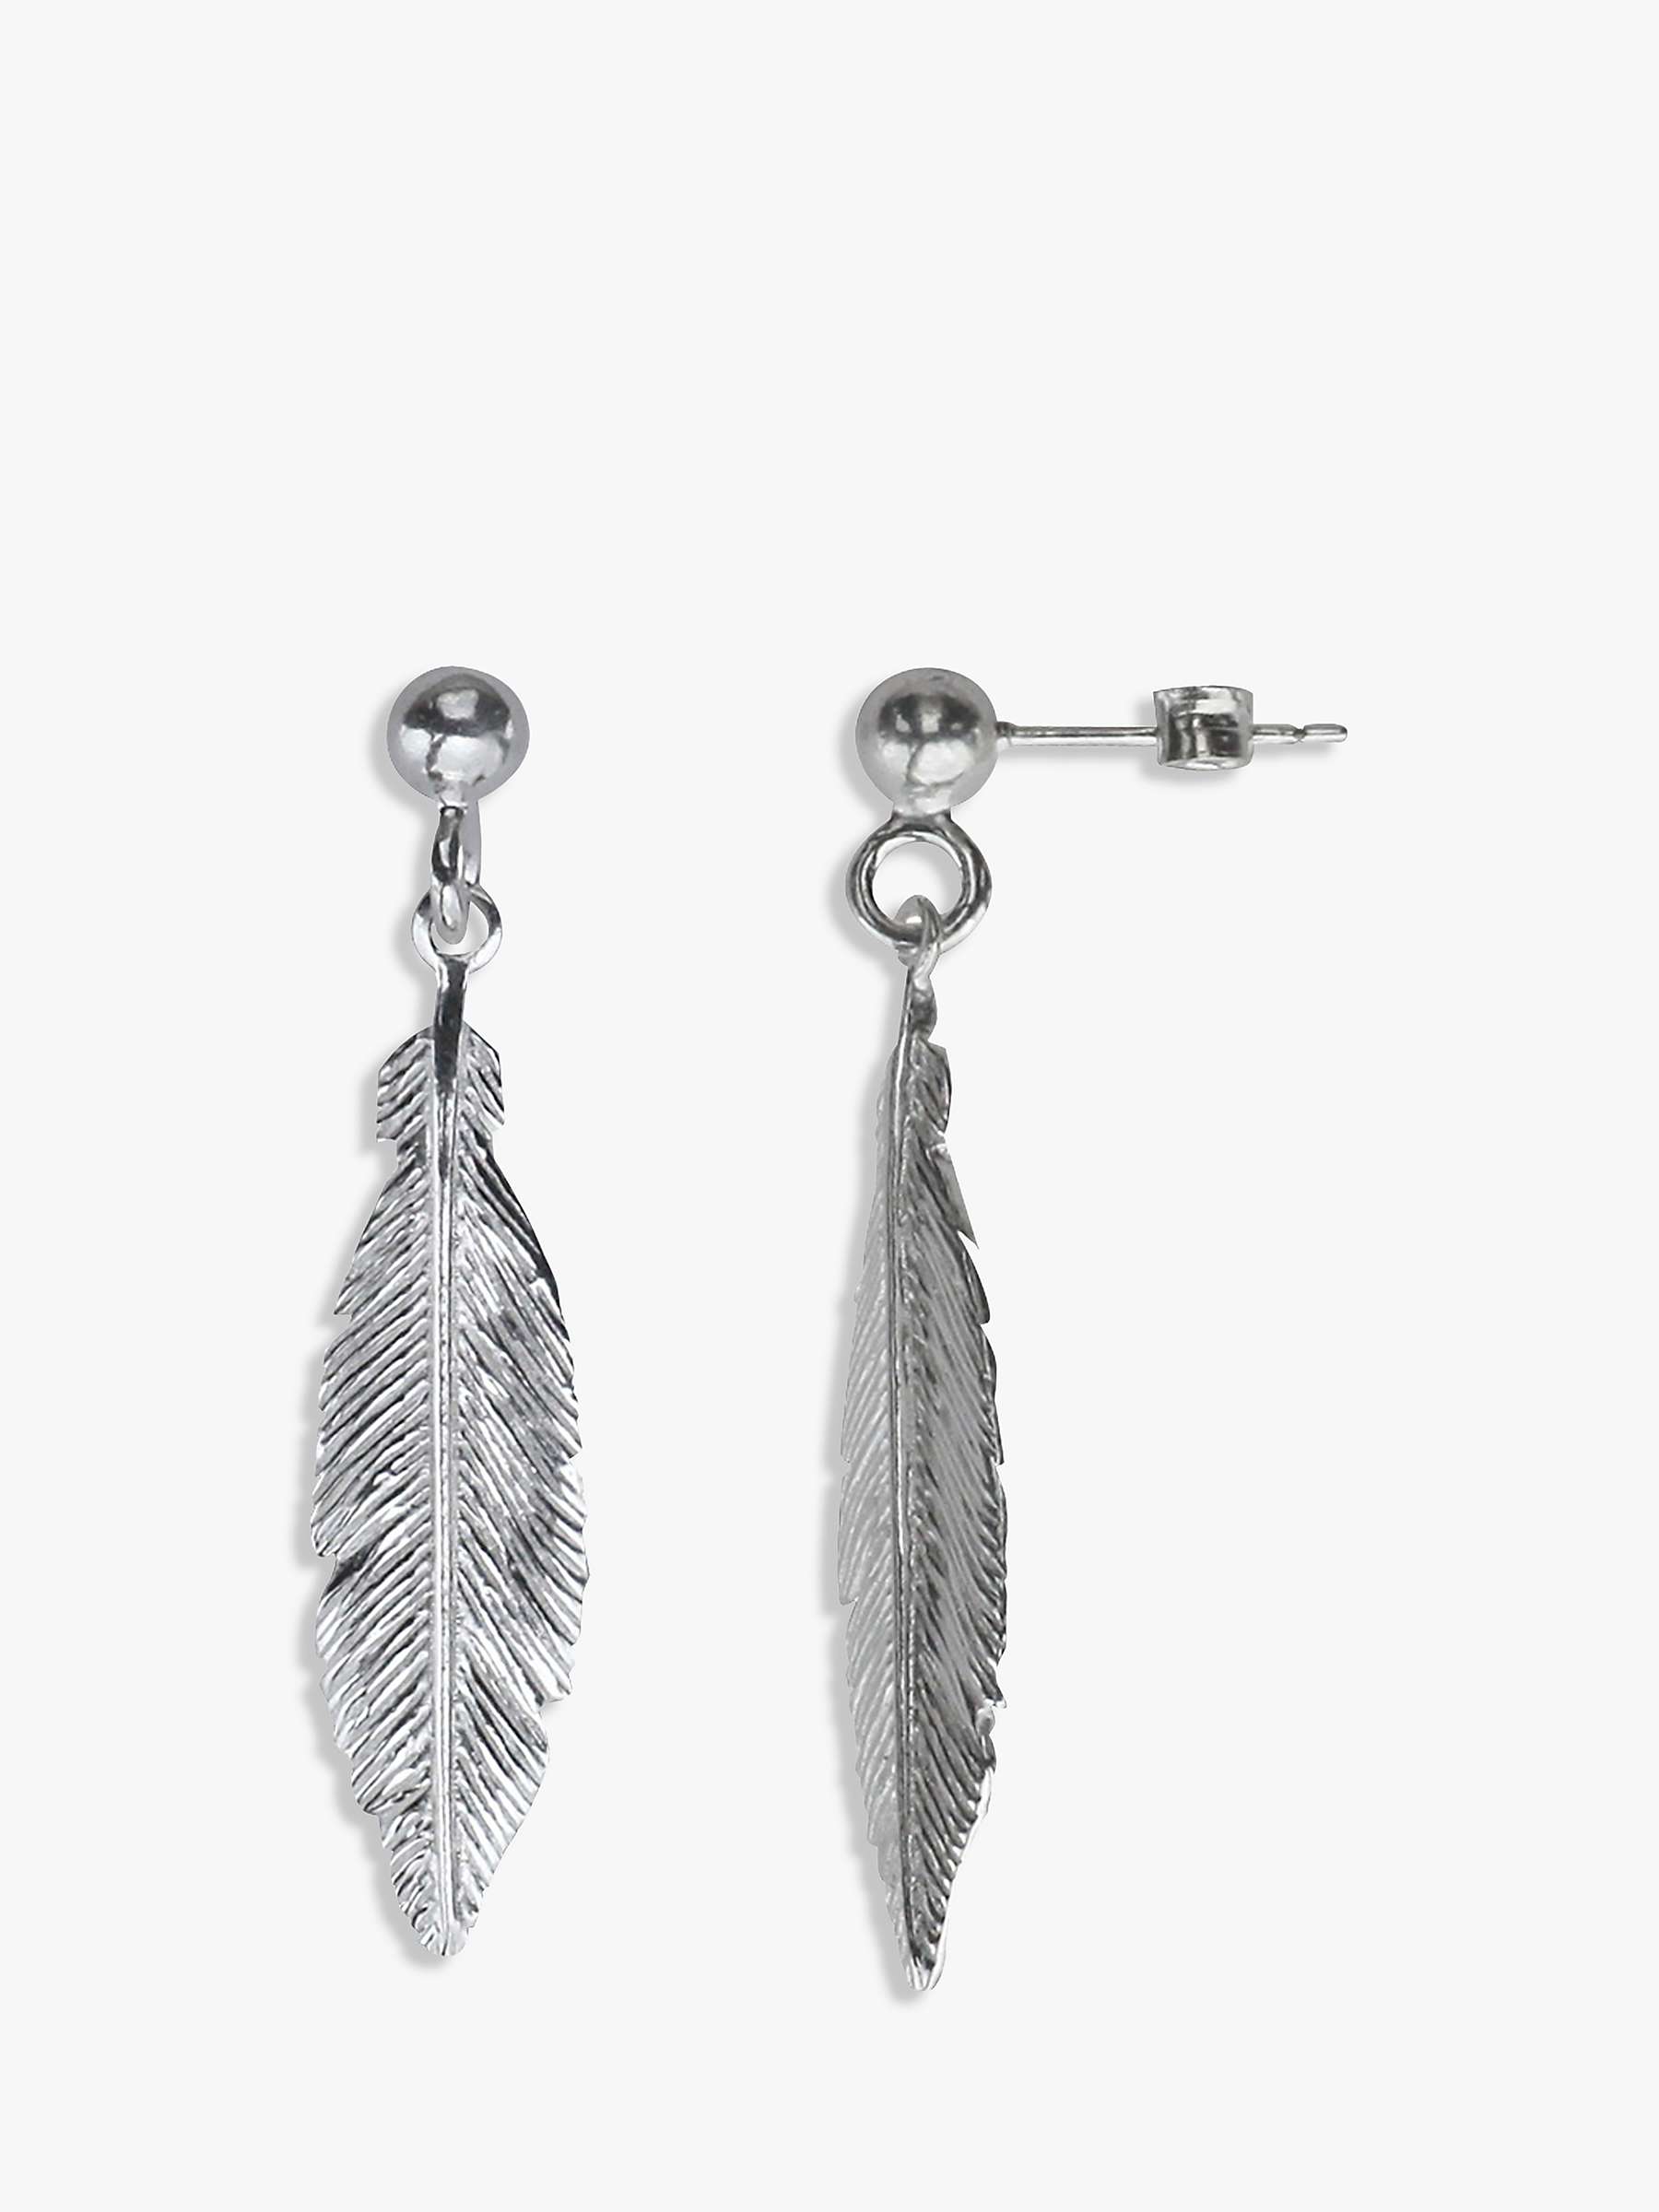 Buy Nina B Sterling Silver Feather Drop Earrings, Silver Online at johnlewis.com